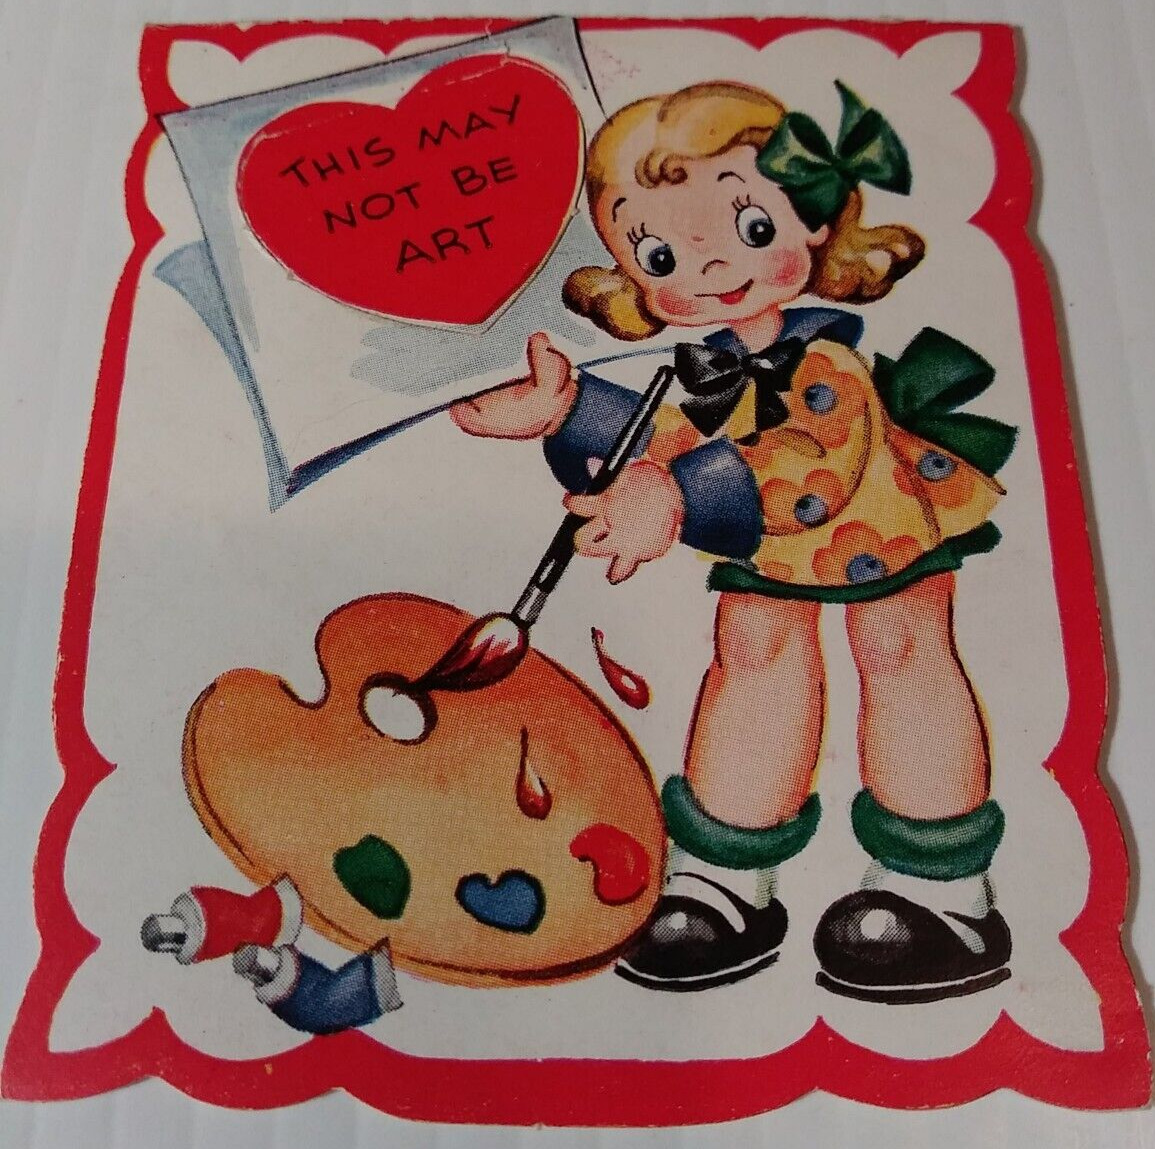 Americard Valentine Vintage Artist Girl Paint Pattete This May Not Be Art Heart